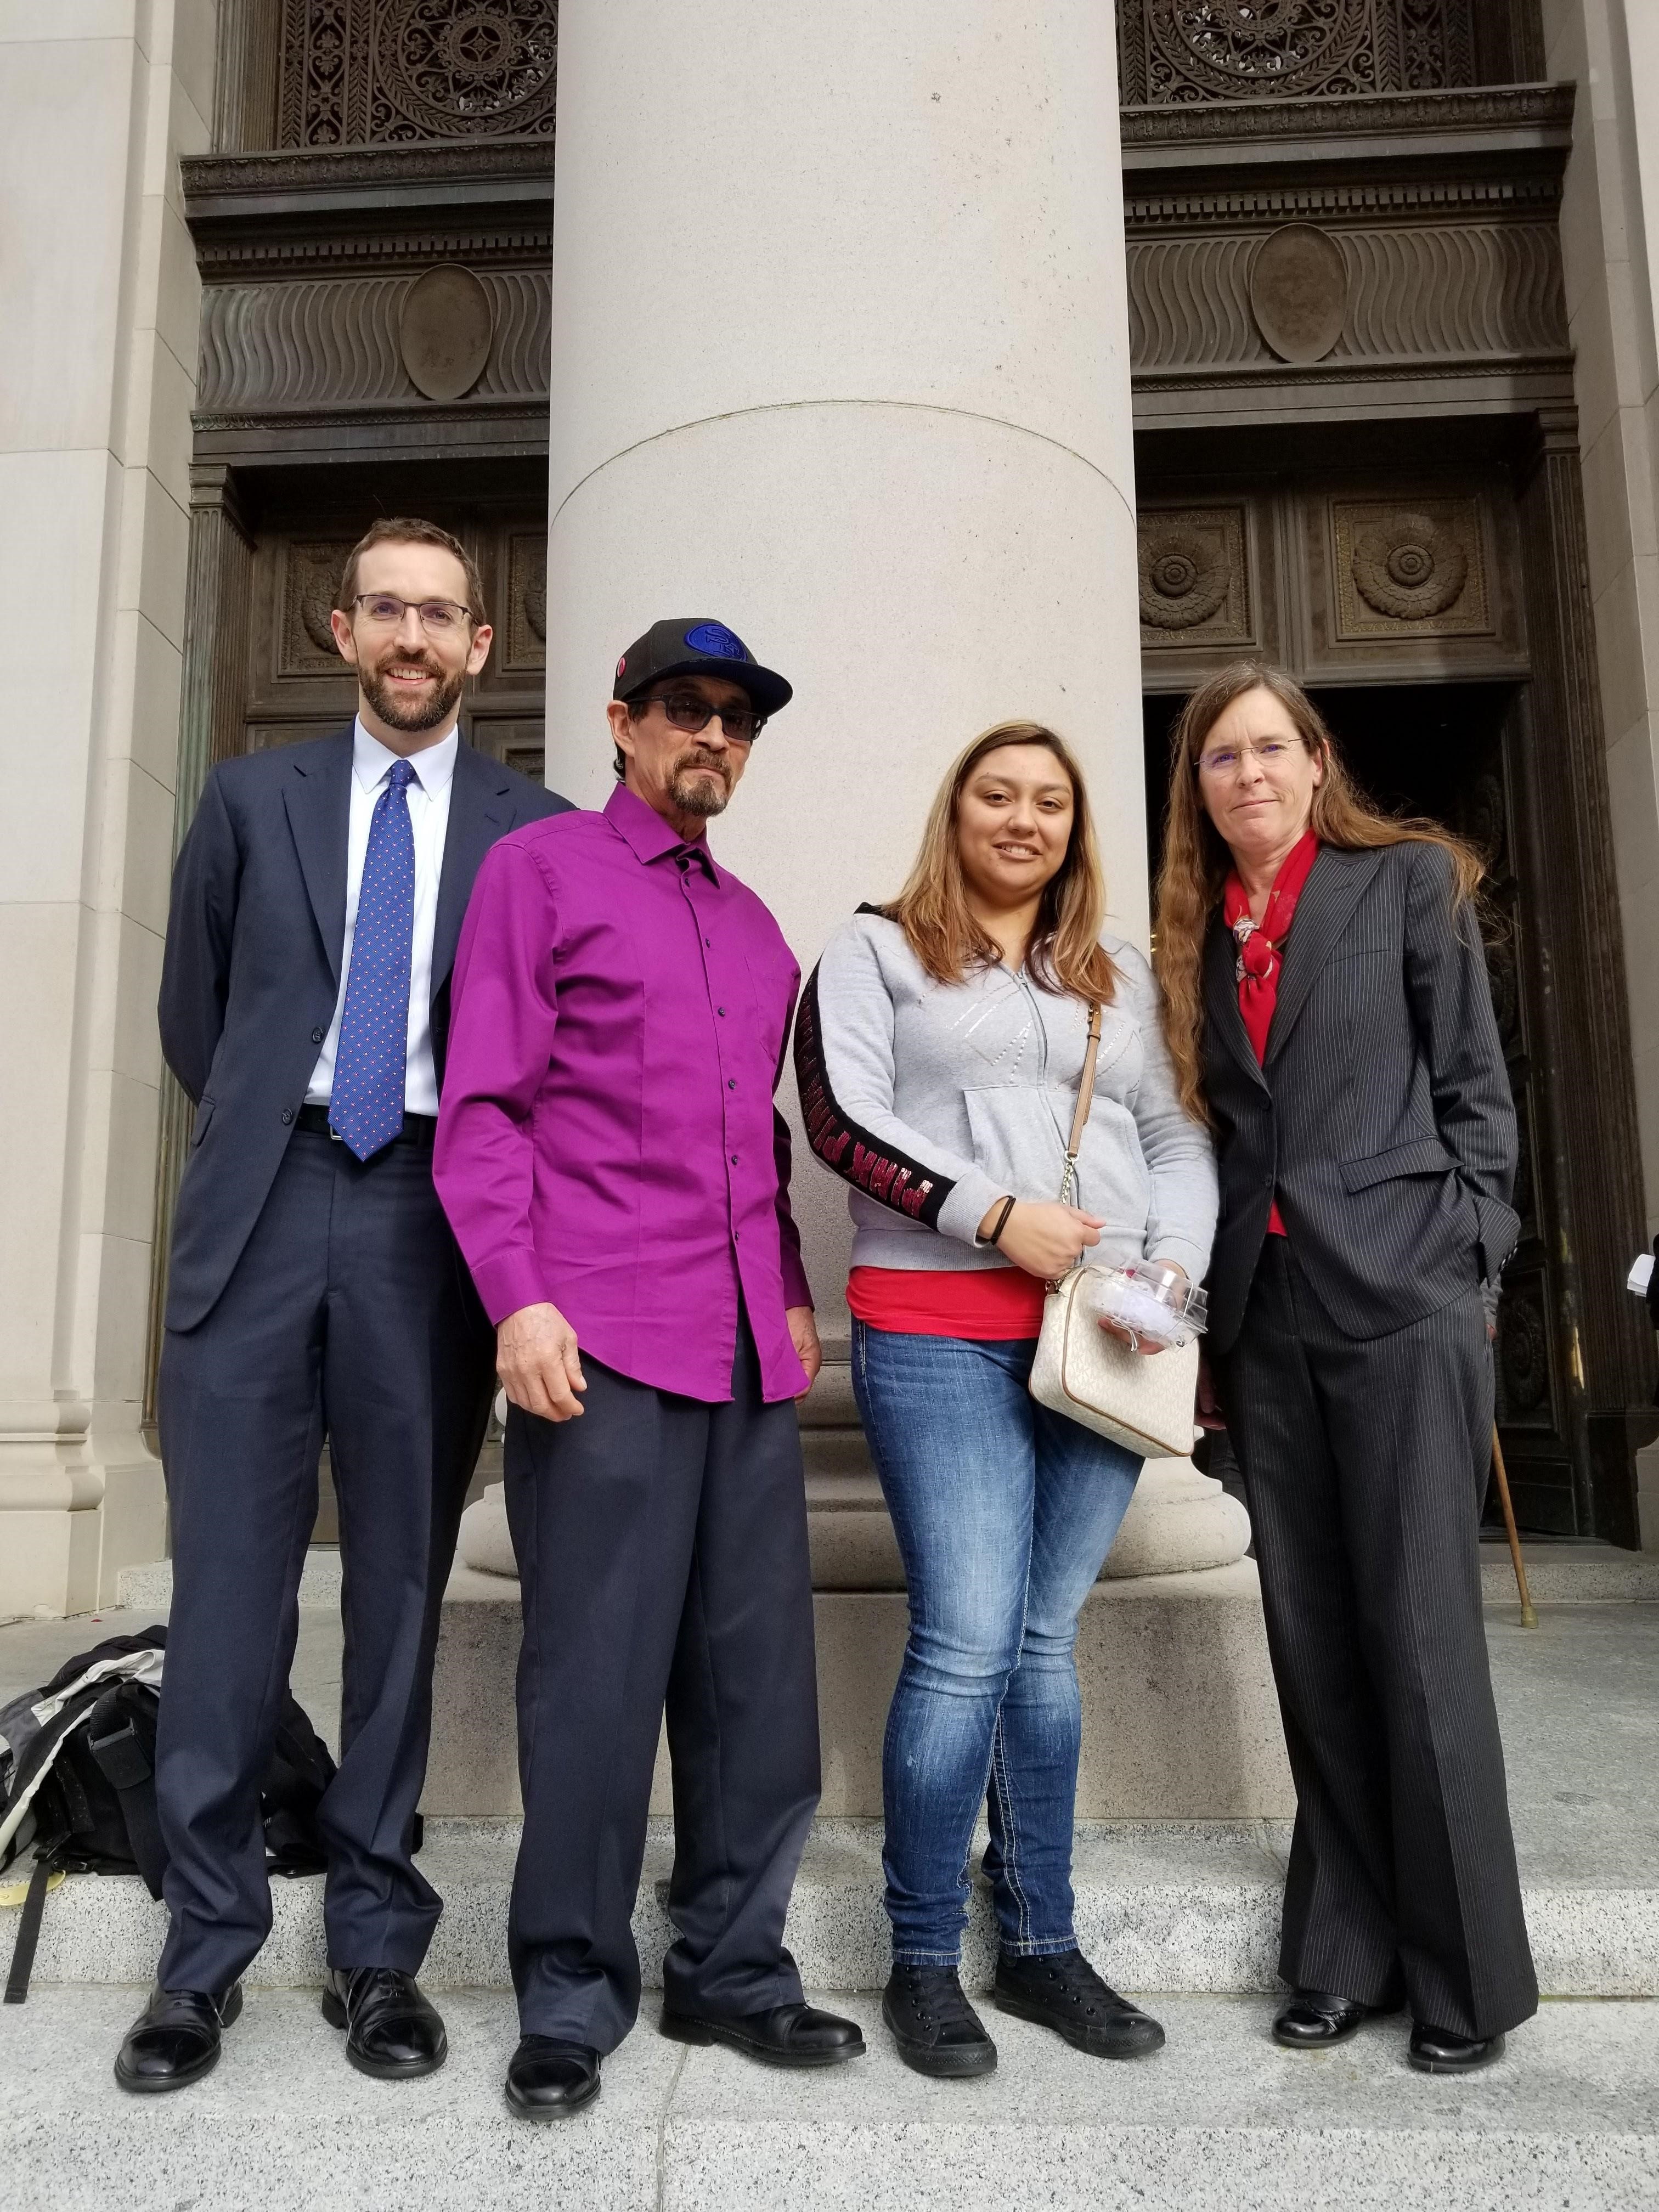 Court win with uncertain outcome for state farm workers